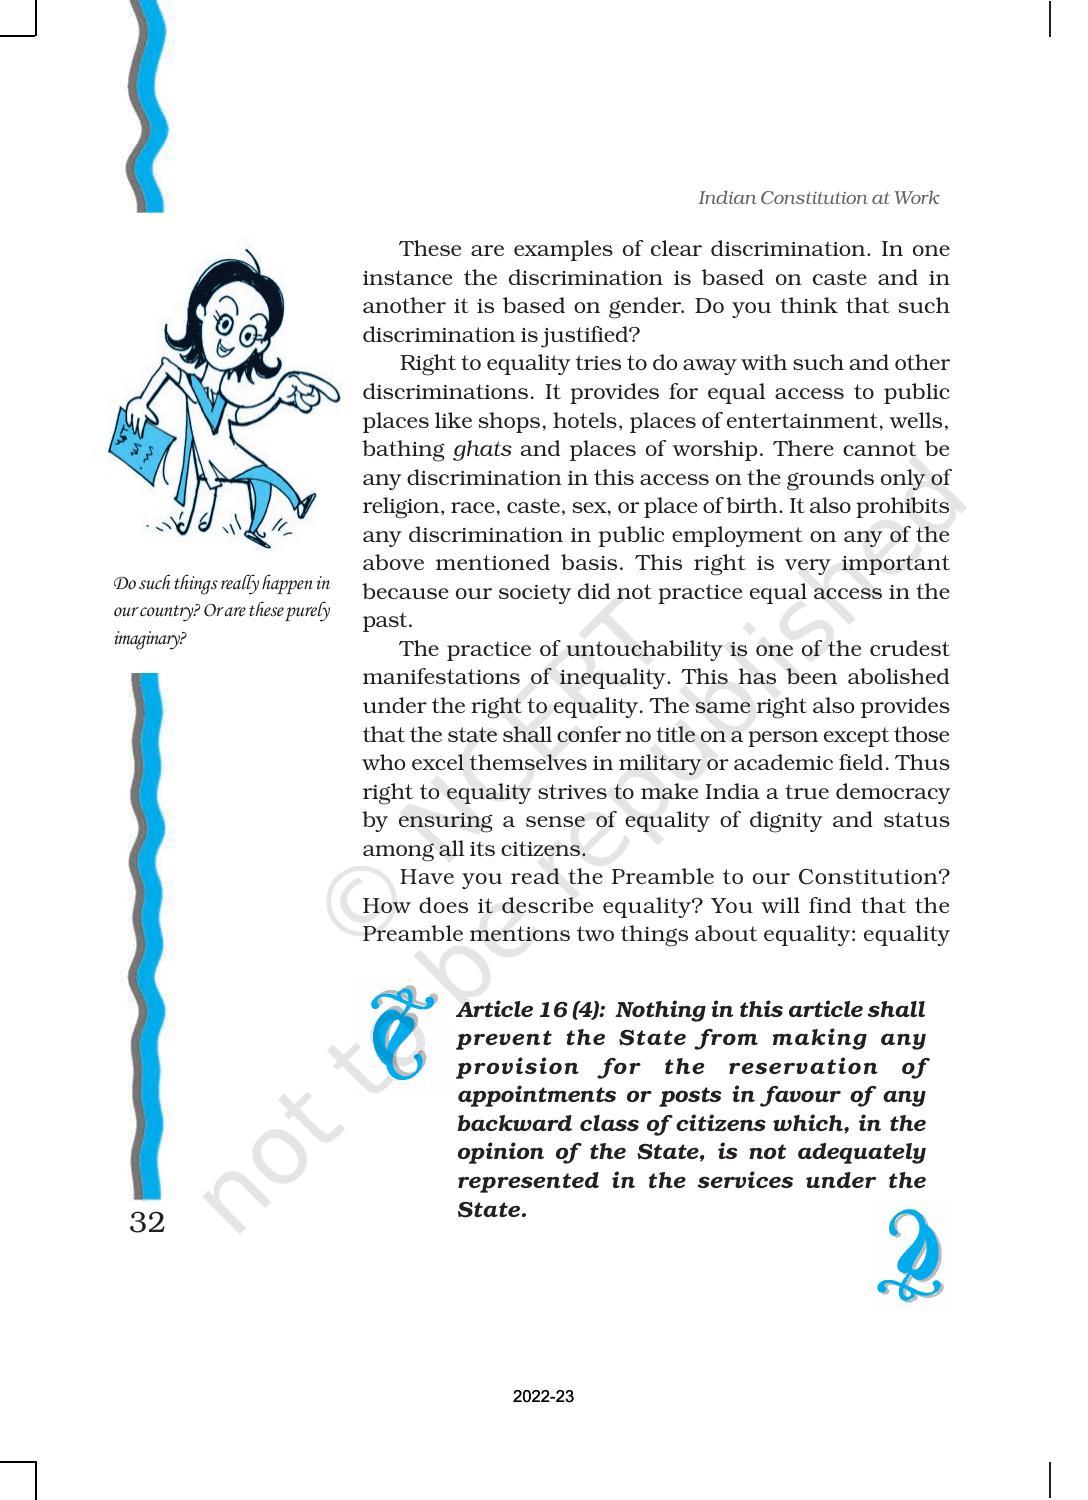 NCERT Book for Class 11 Political Science (Indian Constitution at Work) Chapter 2 Rights in the Indian Constitution - Page 7